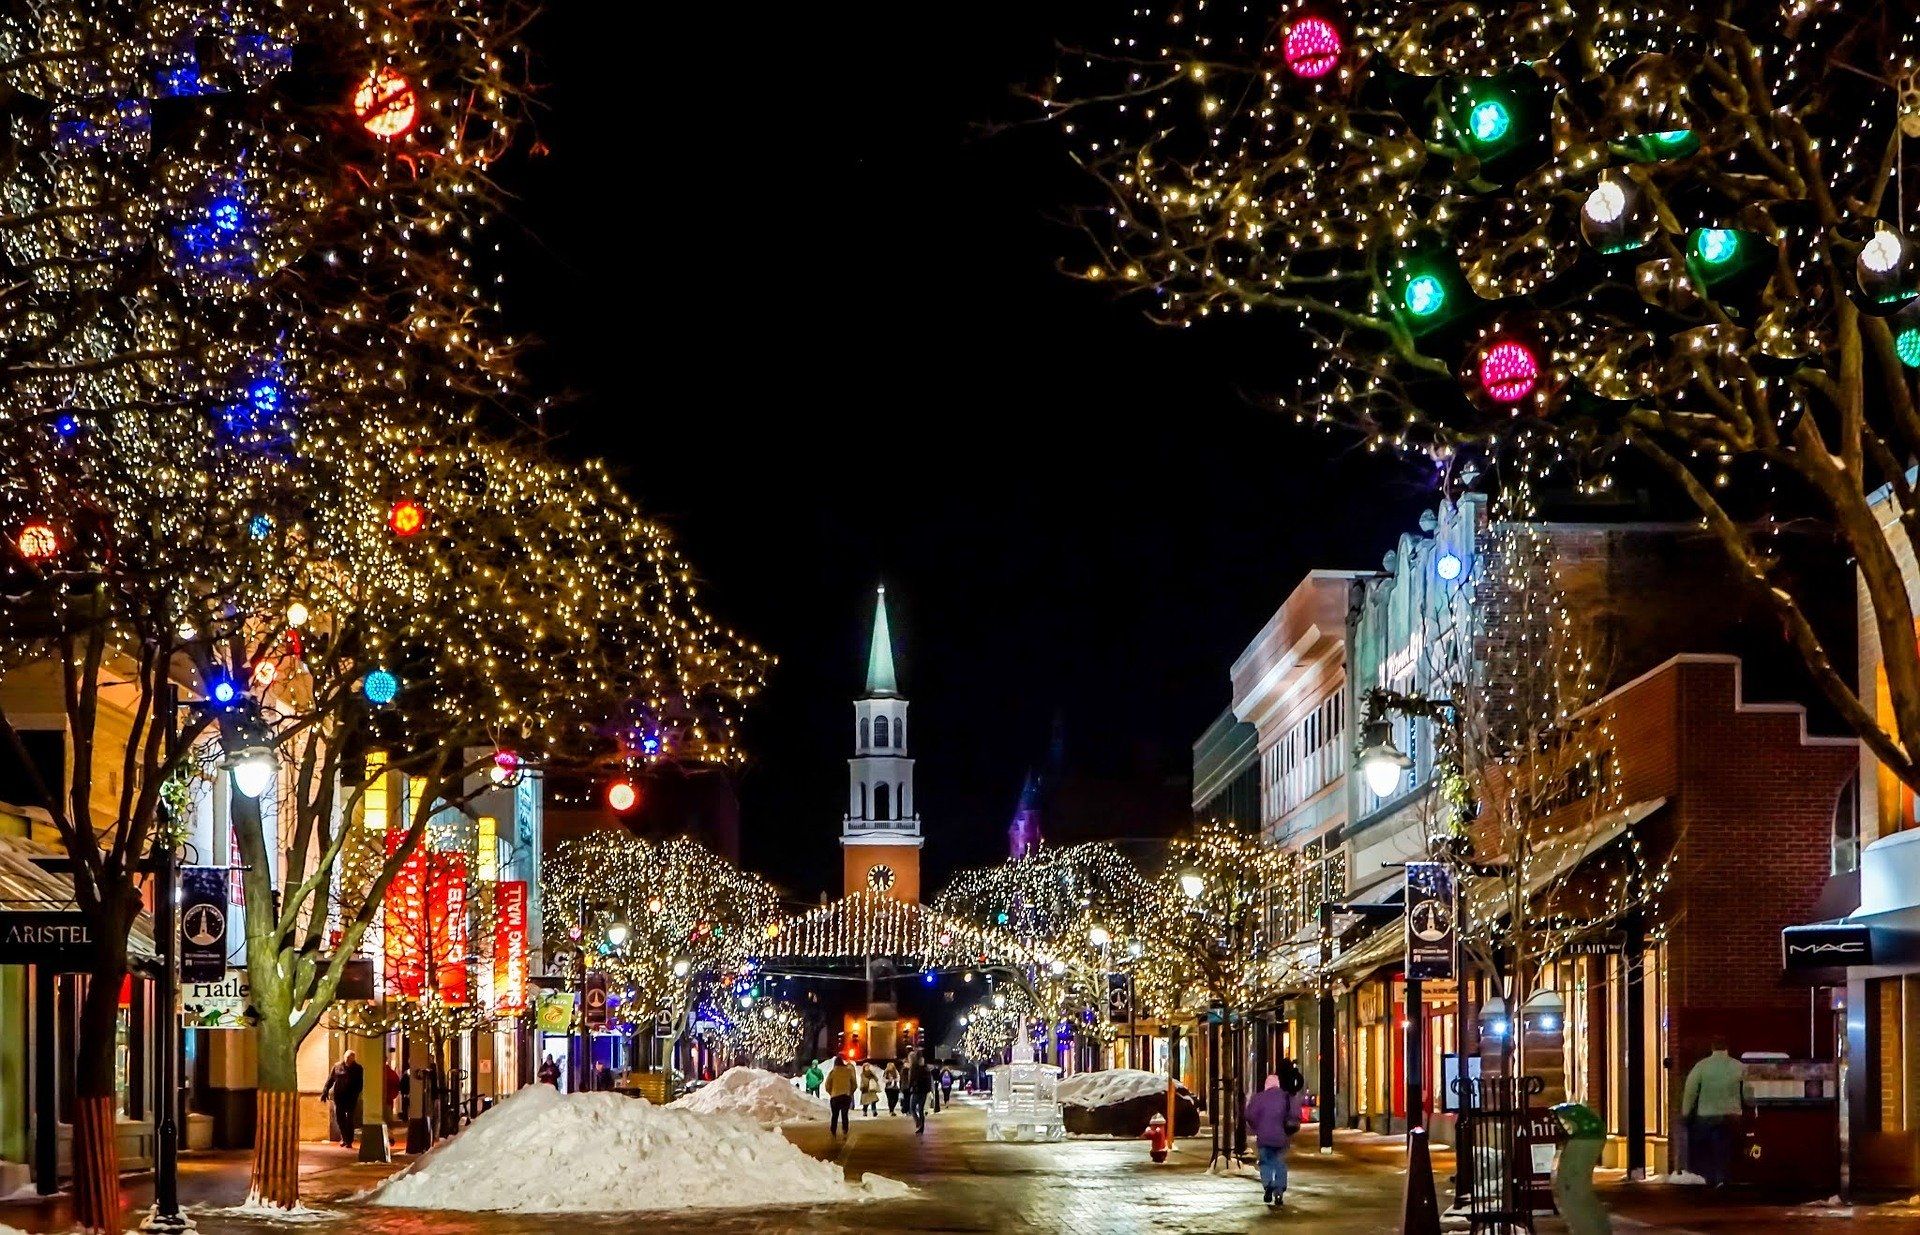 Town with Christmas decorations | Fun Holiday Things to Do | Burkholder Holiday Market